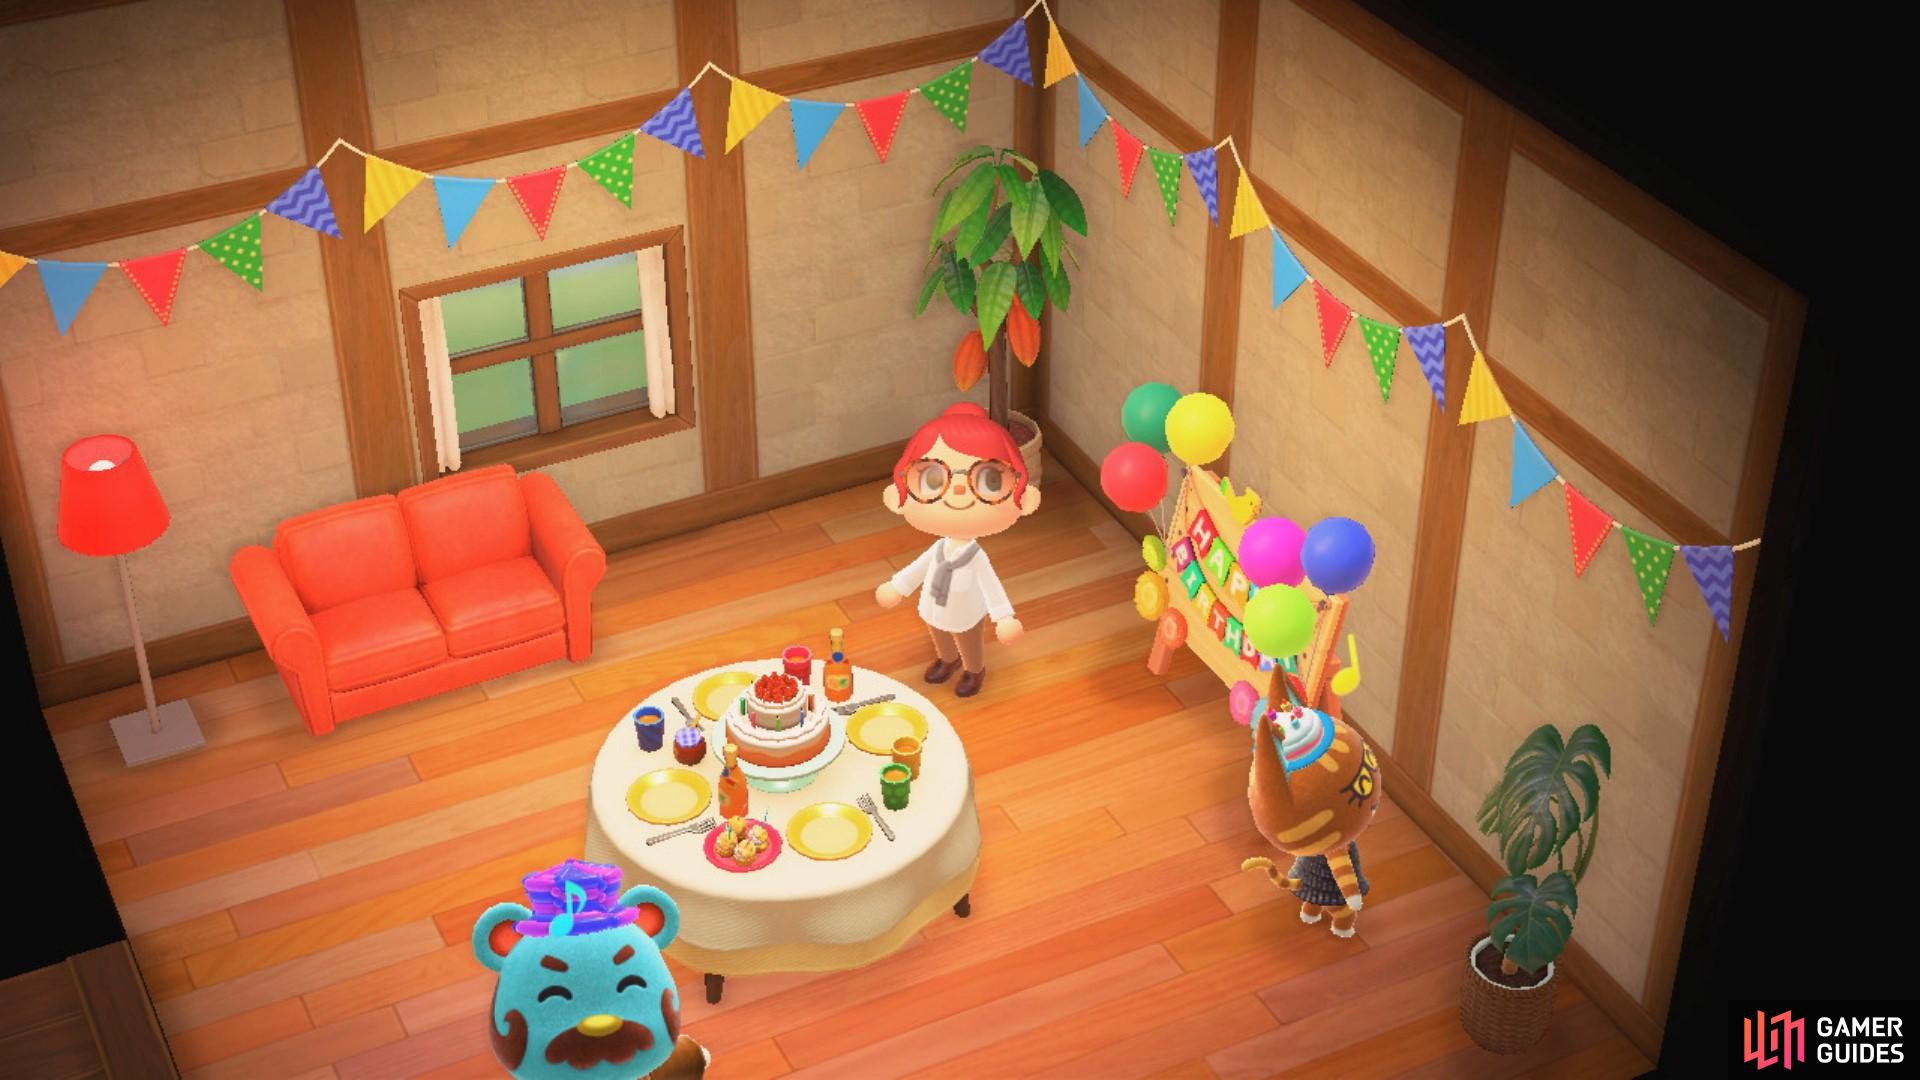 All of the villagers have their own birthdays.